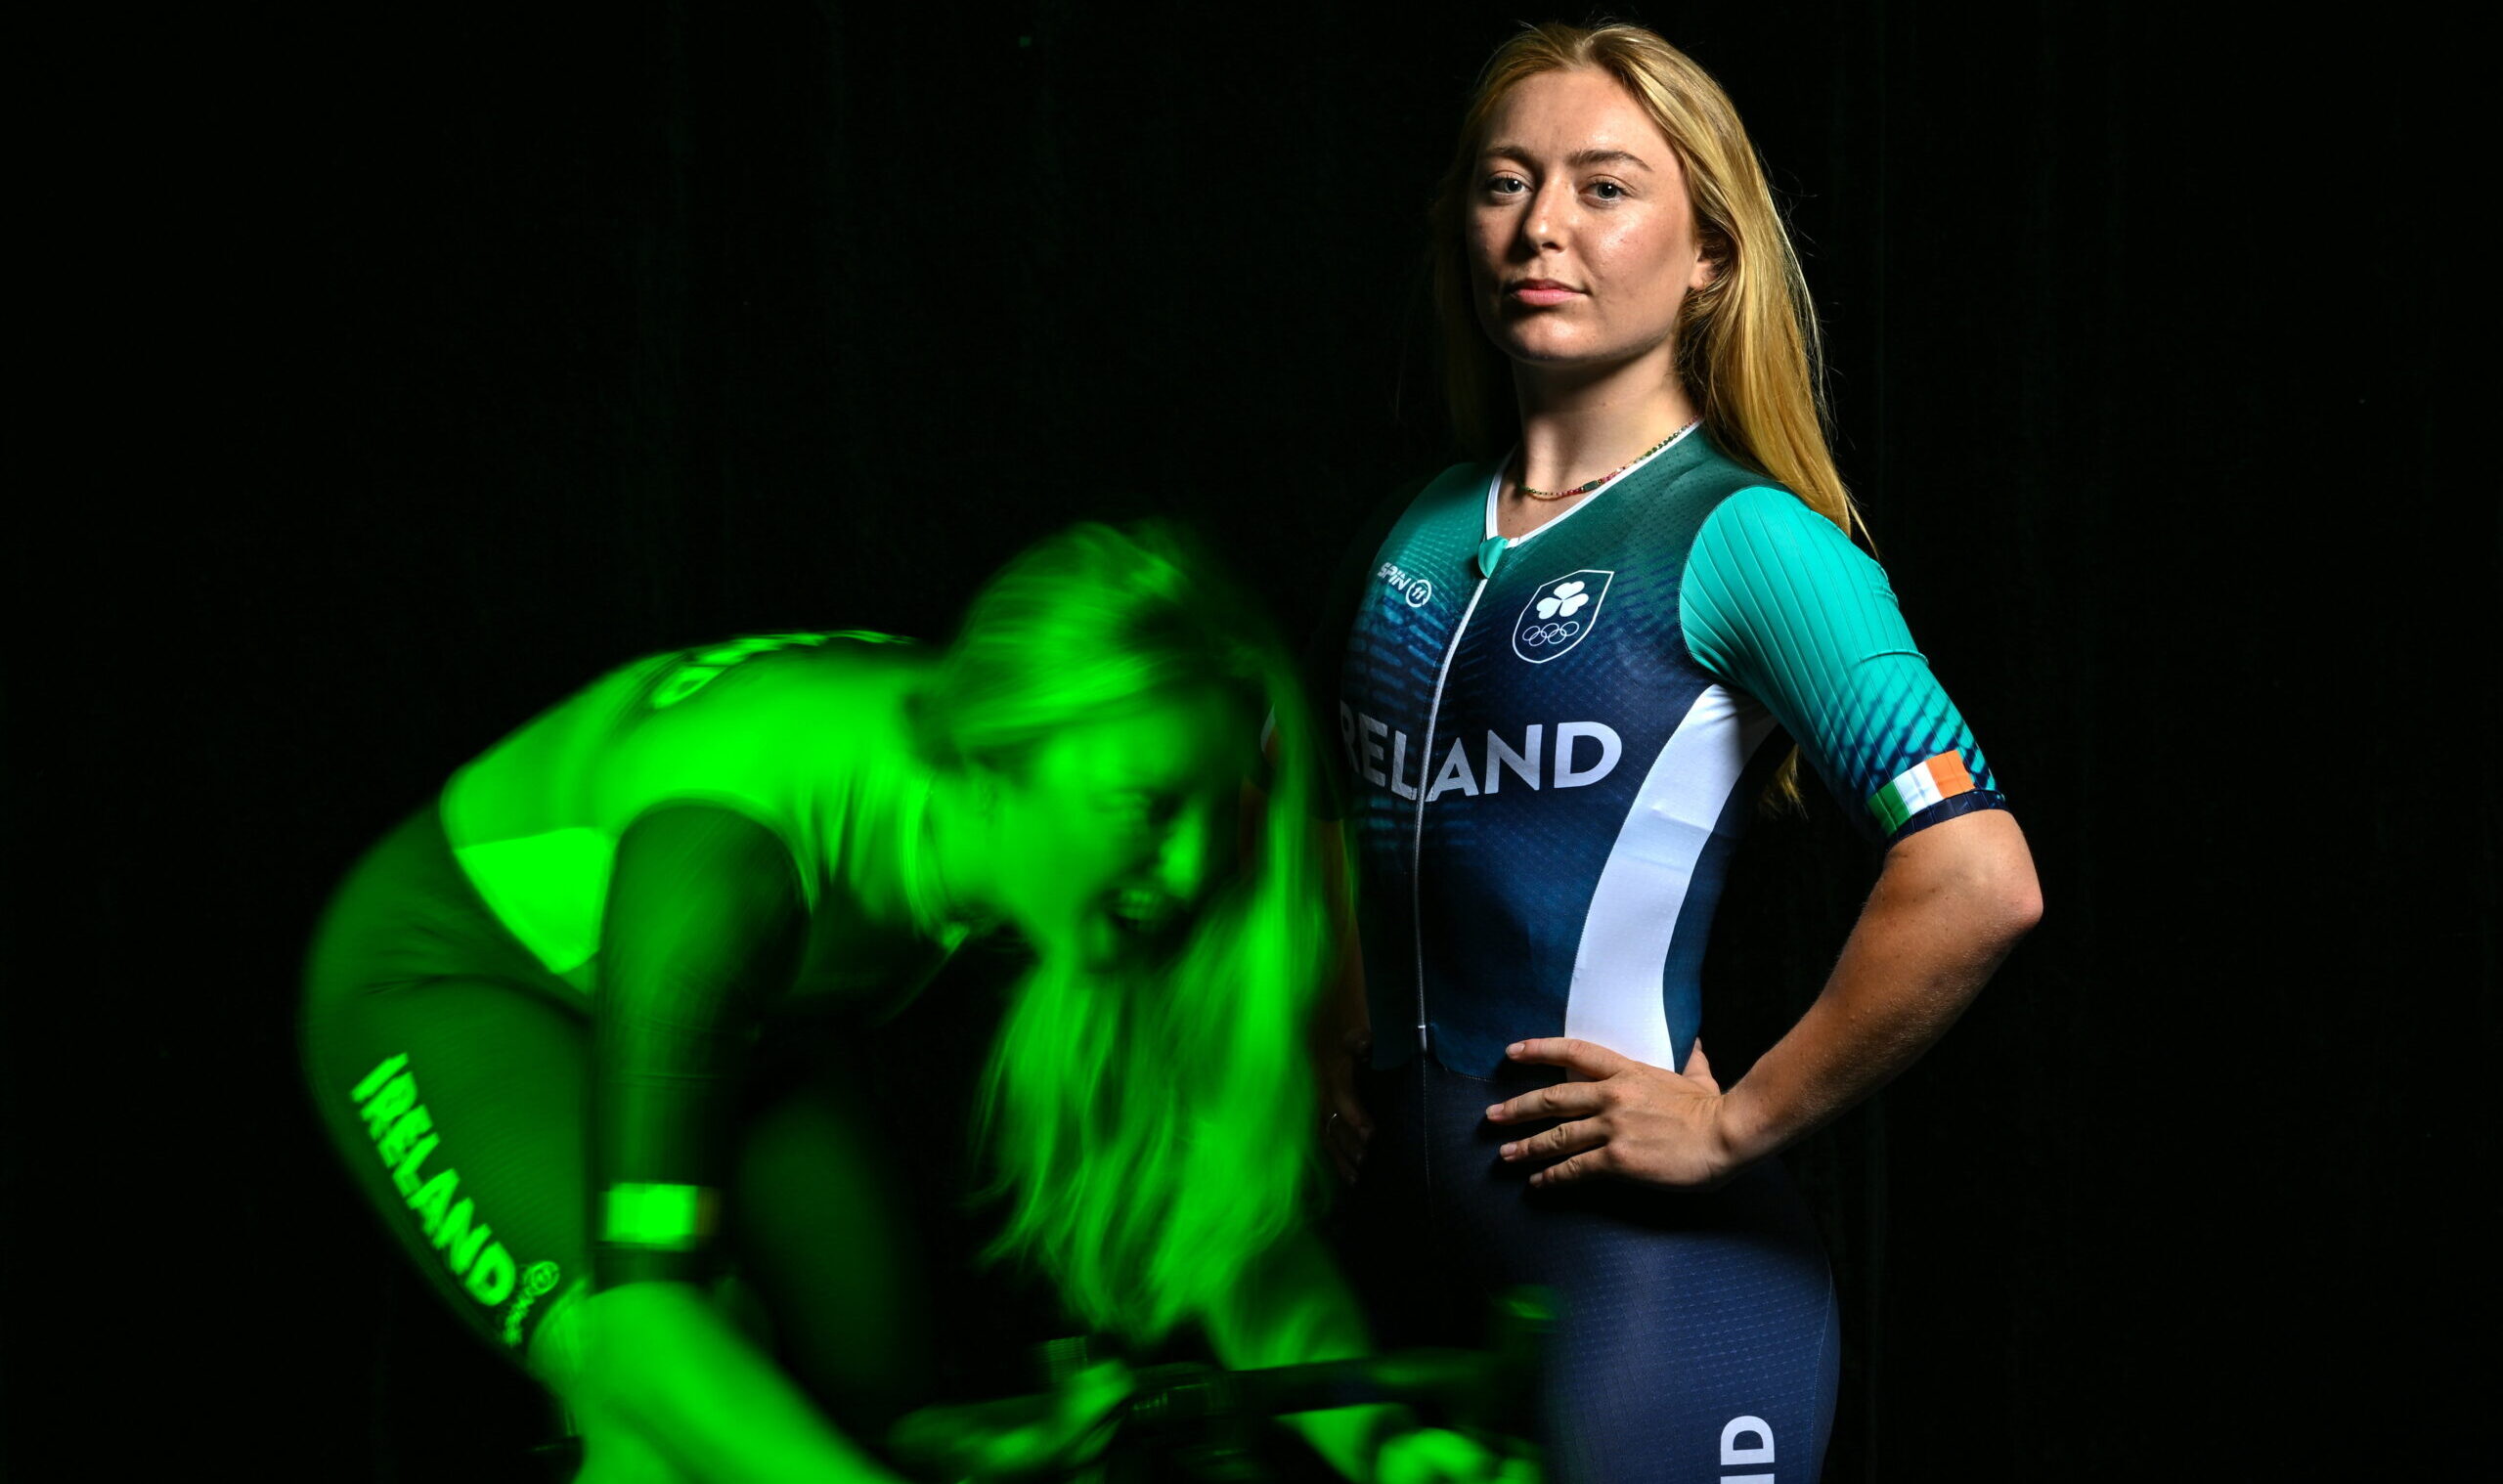 Photo Gallery | Irish Olympic cycling team and officials set for Paris